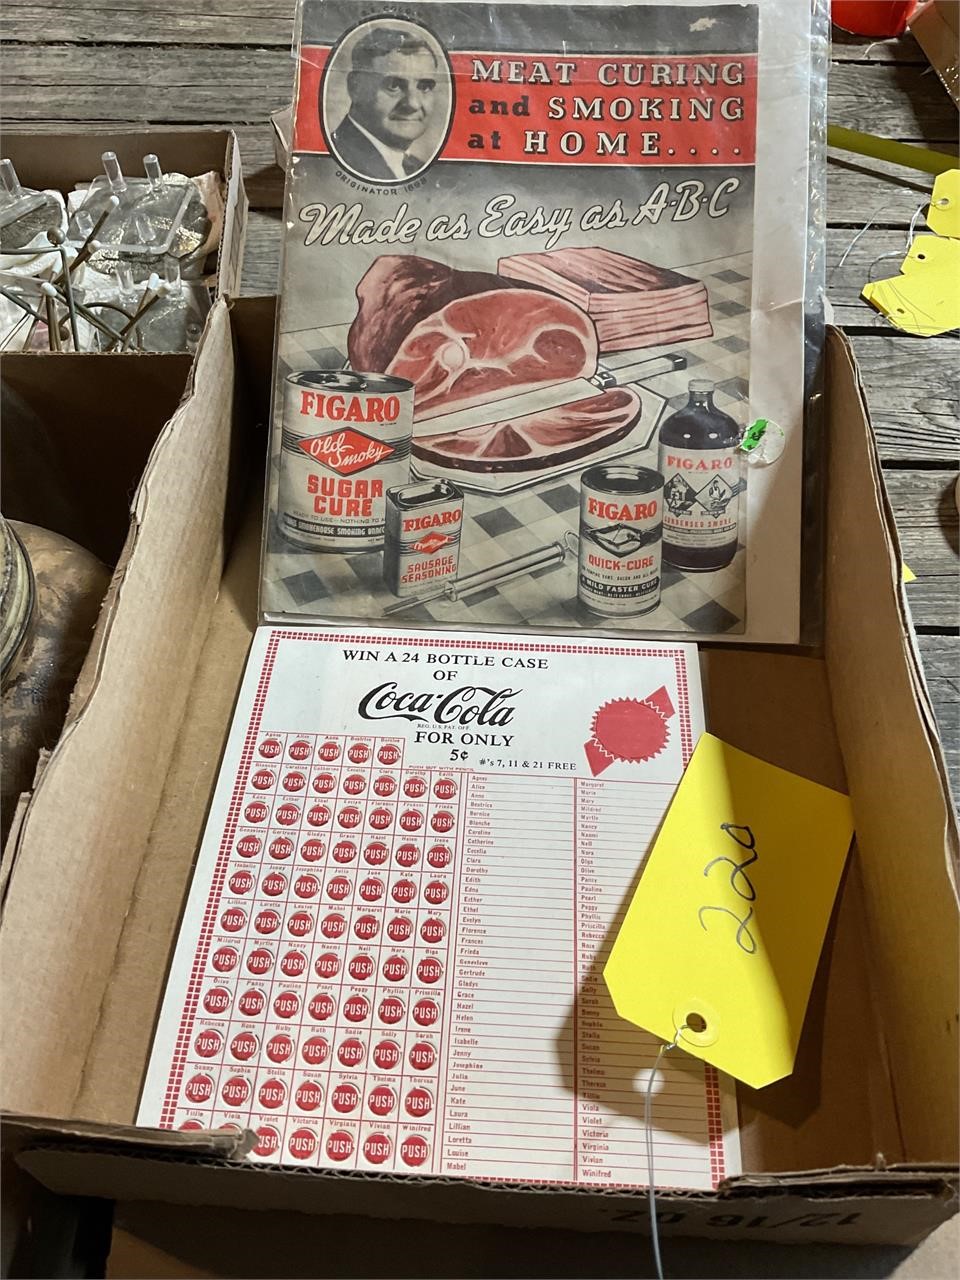 Coca-Cola advertising punchboard meat curing AD